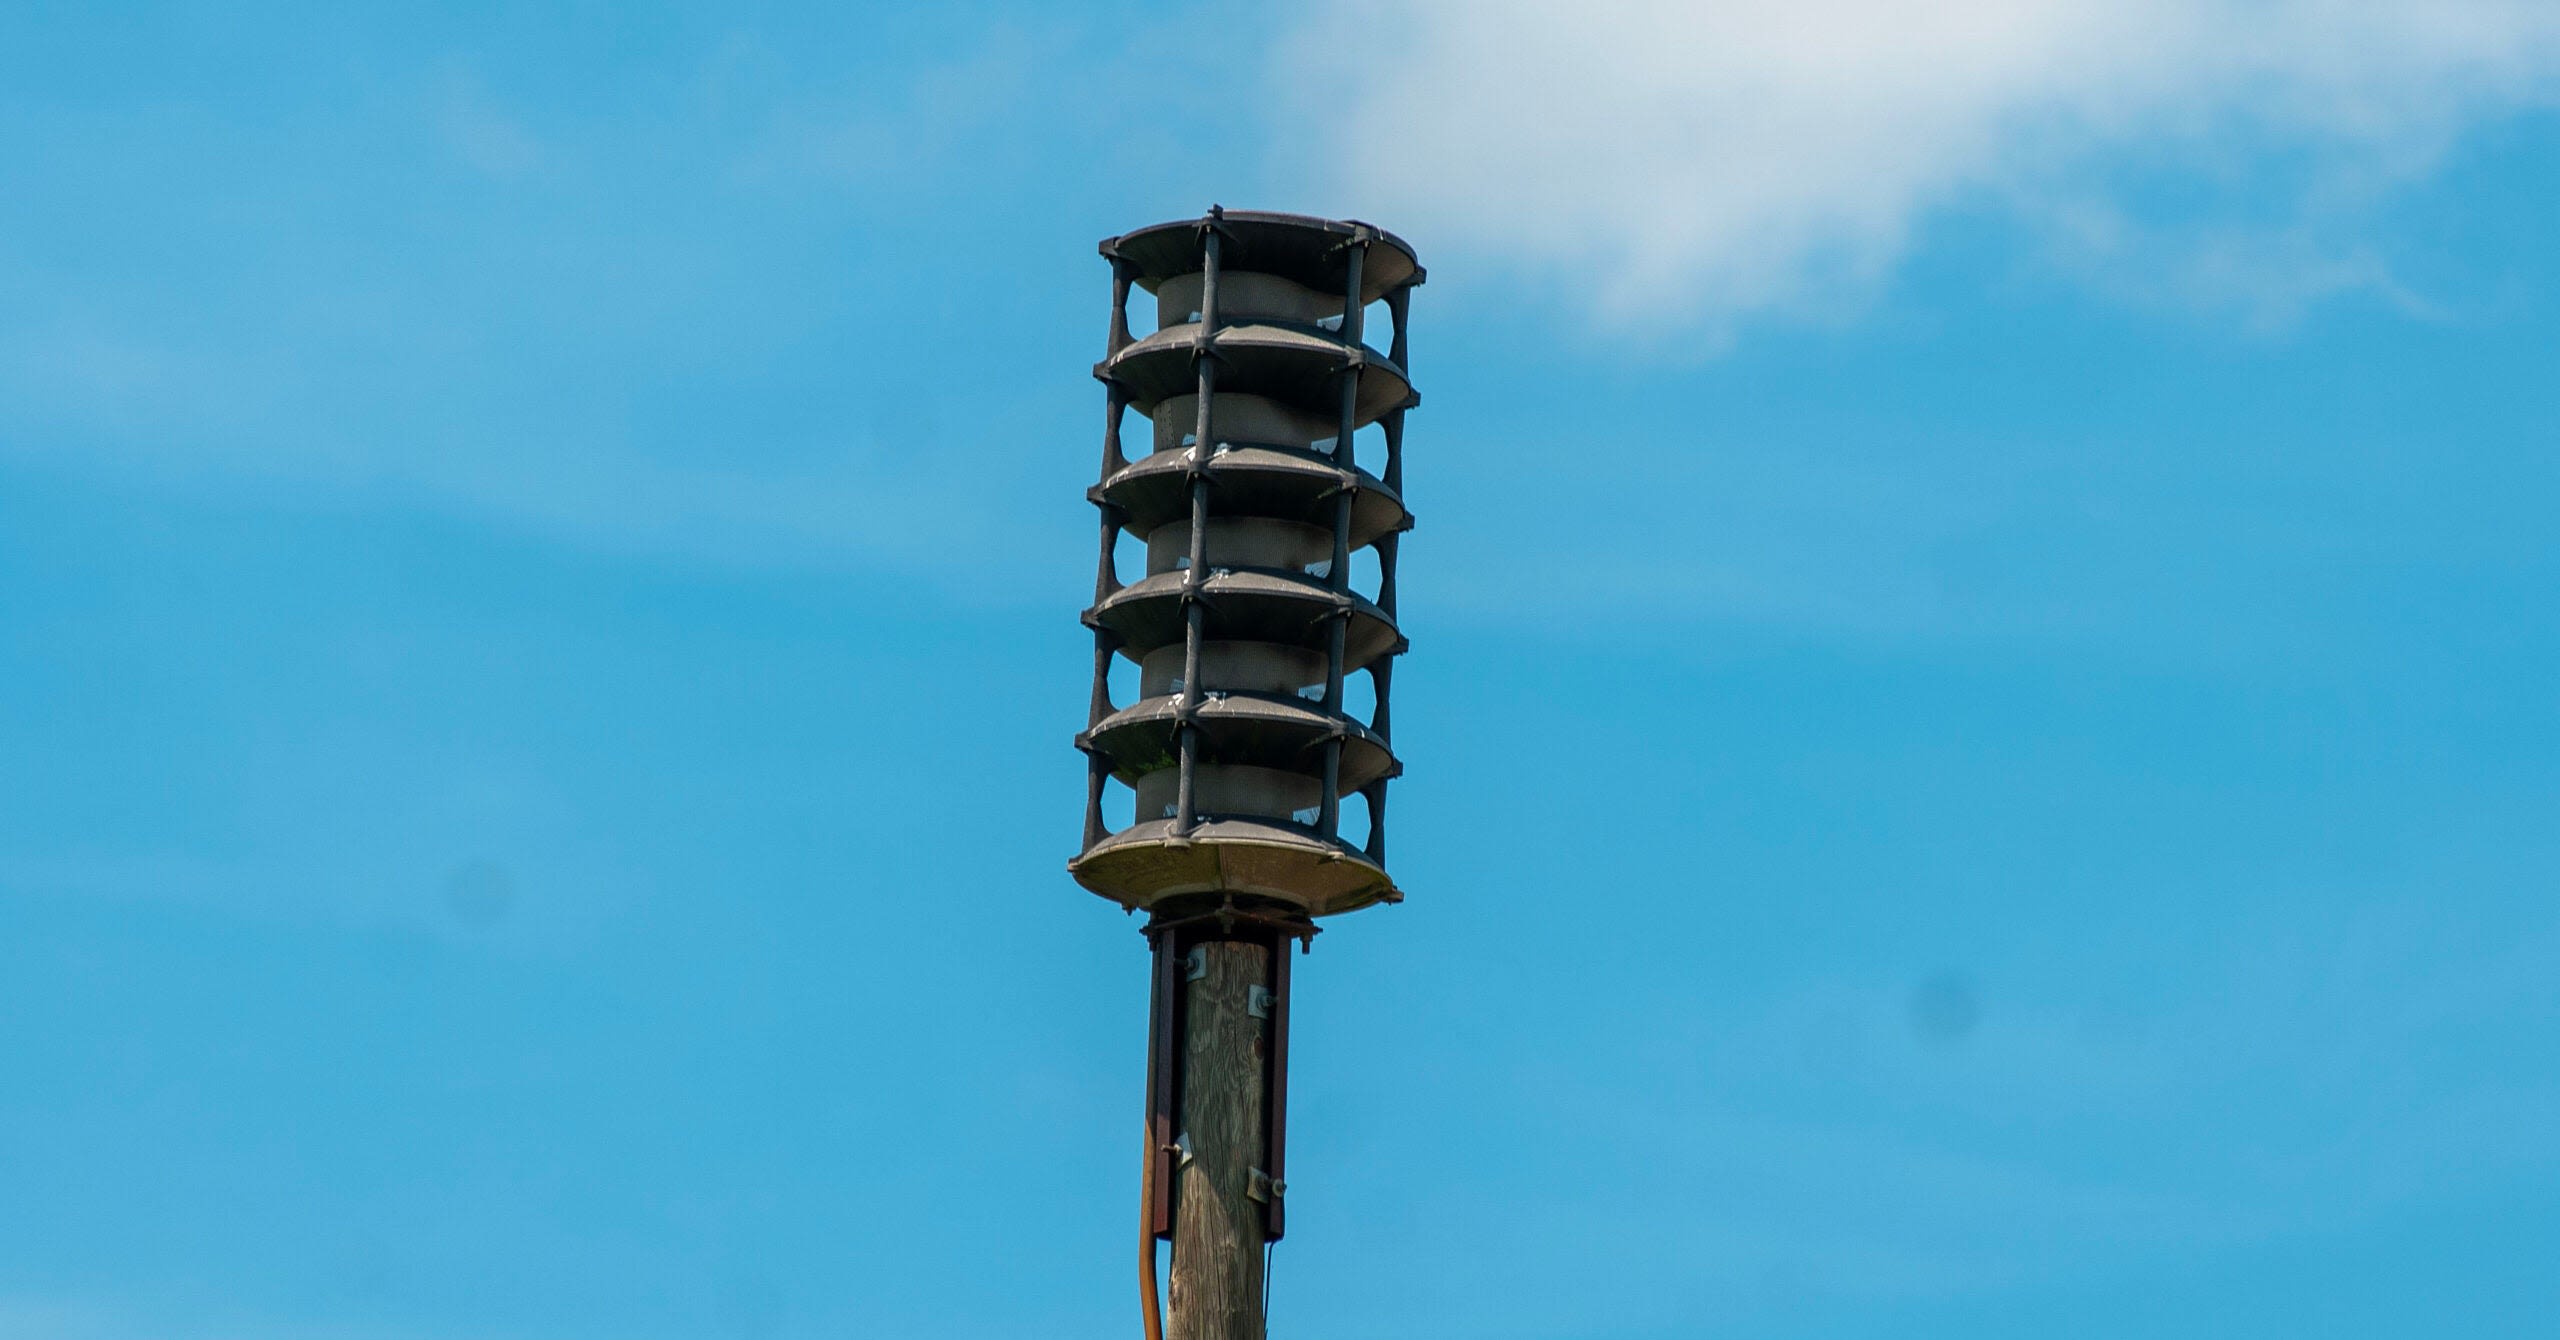 Weather sirens to be tested Tuesday - The Selma Times‑Journal